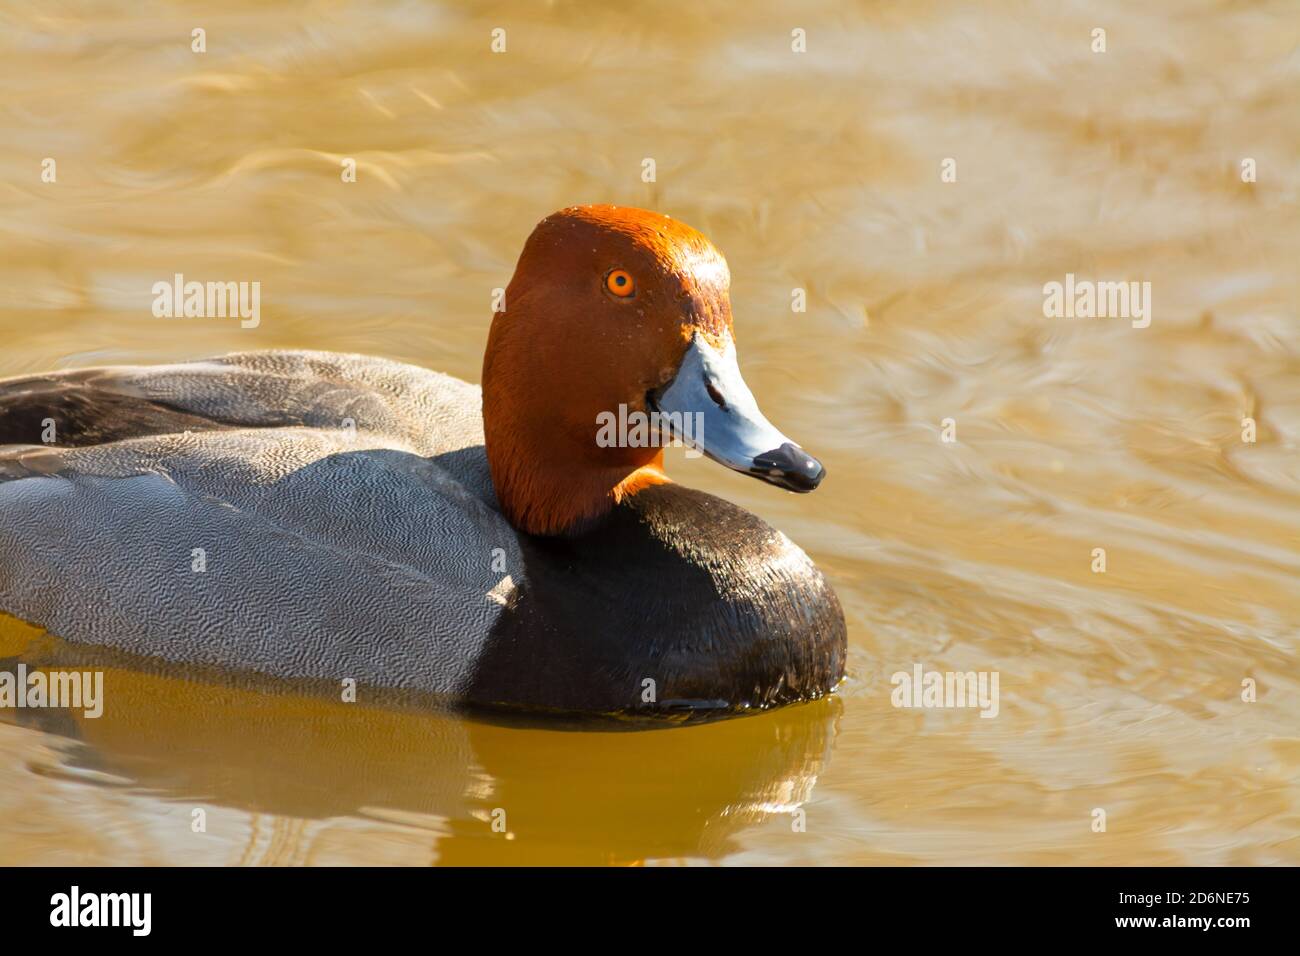 A male redhead duck, Aythya americana, swimming in a wetland pond in central Alberta, Canada Stock Photo